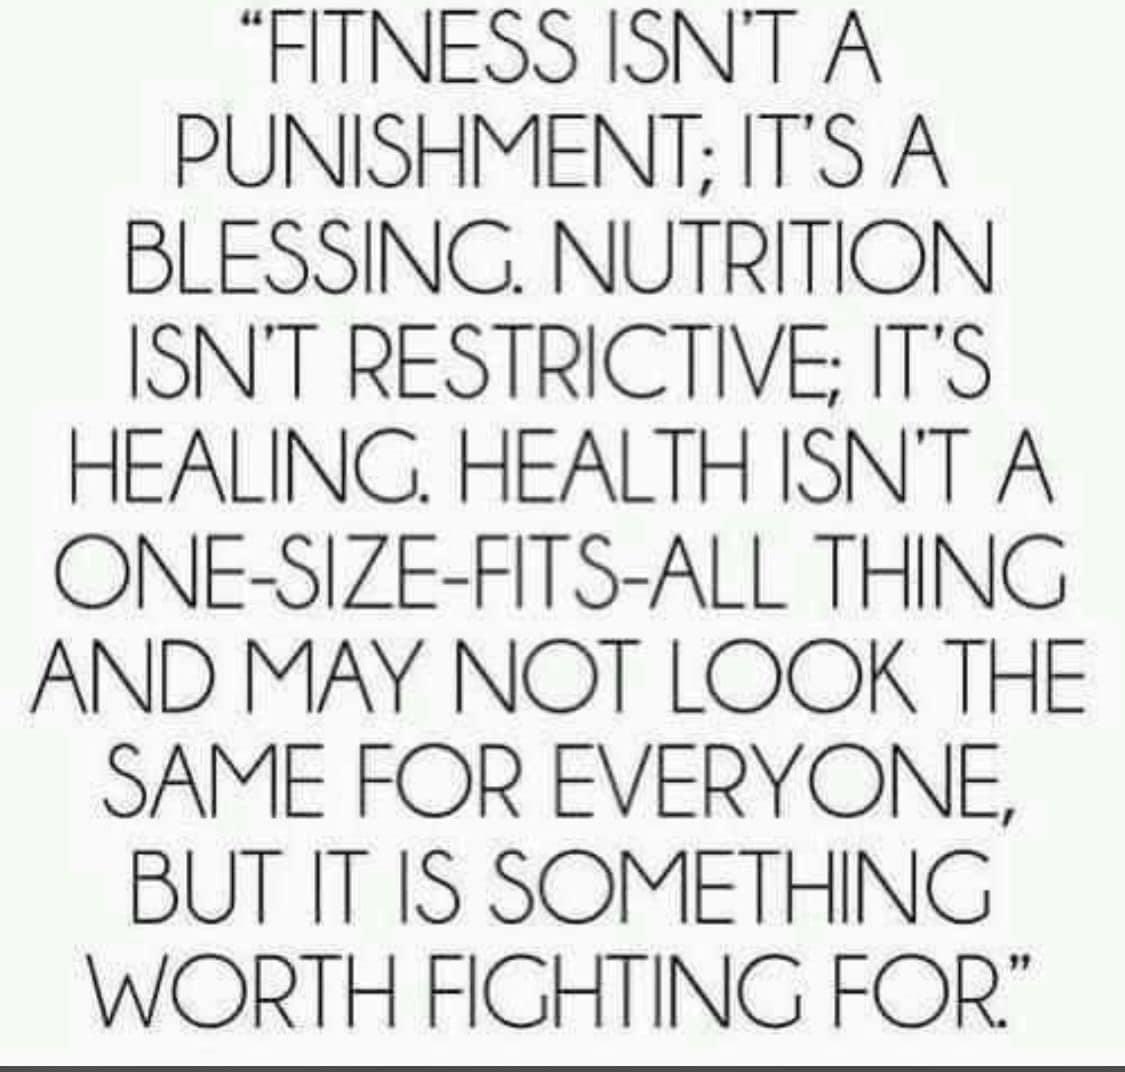 ITS A BLESSING BEING HEALTHY. DON’T NEGLECT YOUR HEALTH.

BE BETTER 

#CONSISTENCY  #TeamAvs 
#AVSFITNESS ❤️🙏🏽